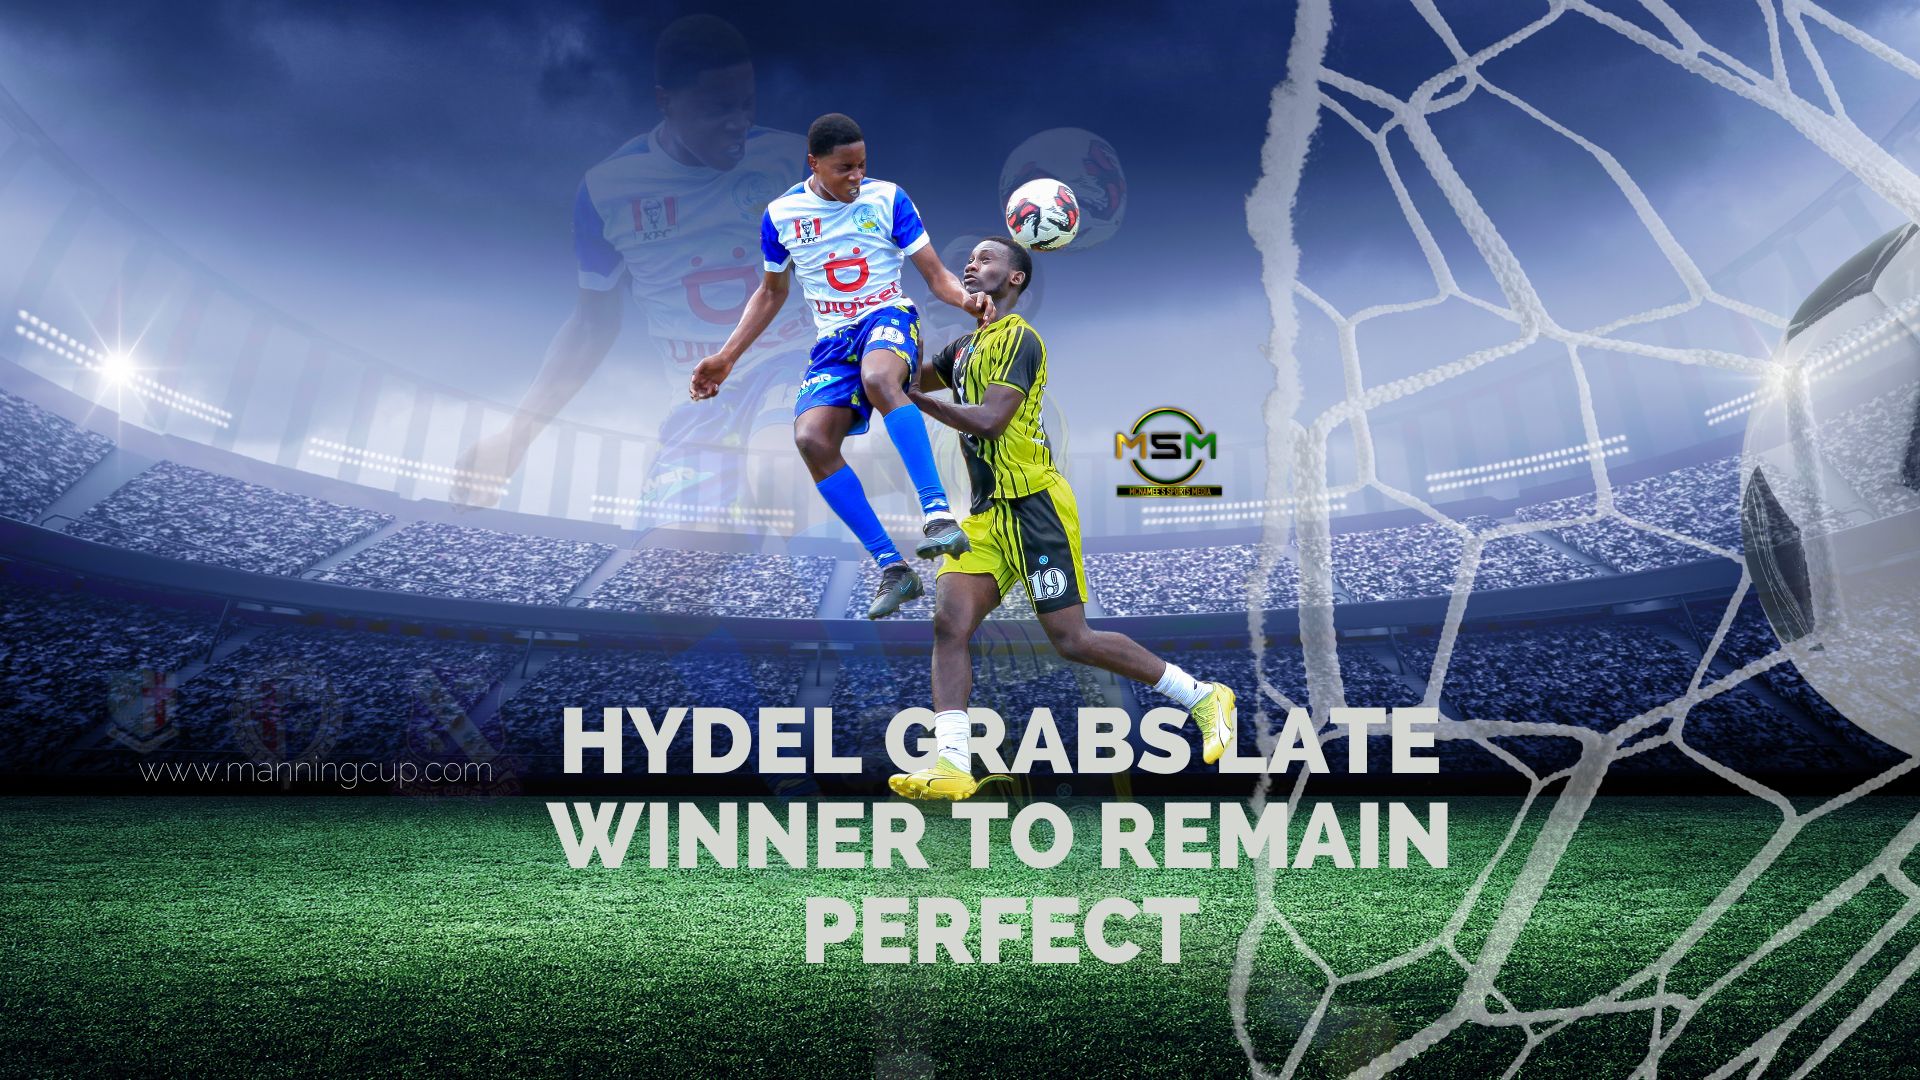 Hydel grabs the late winner to remain perfect